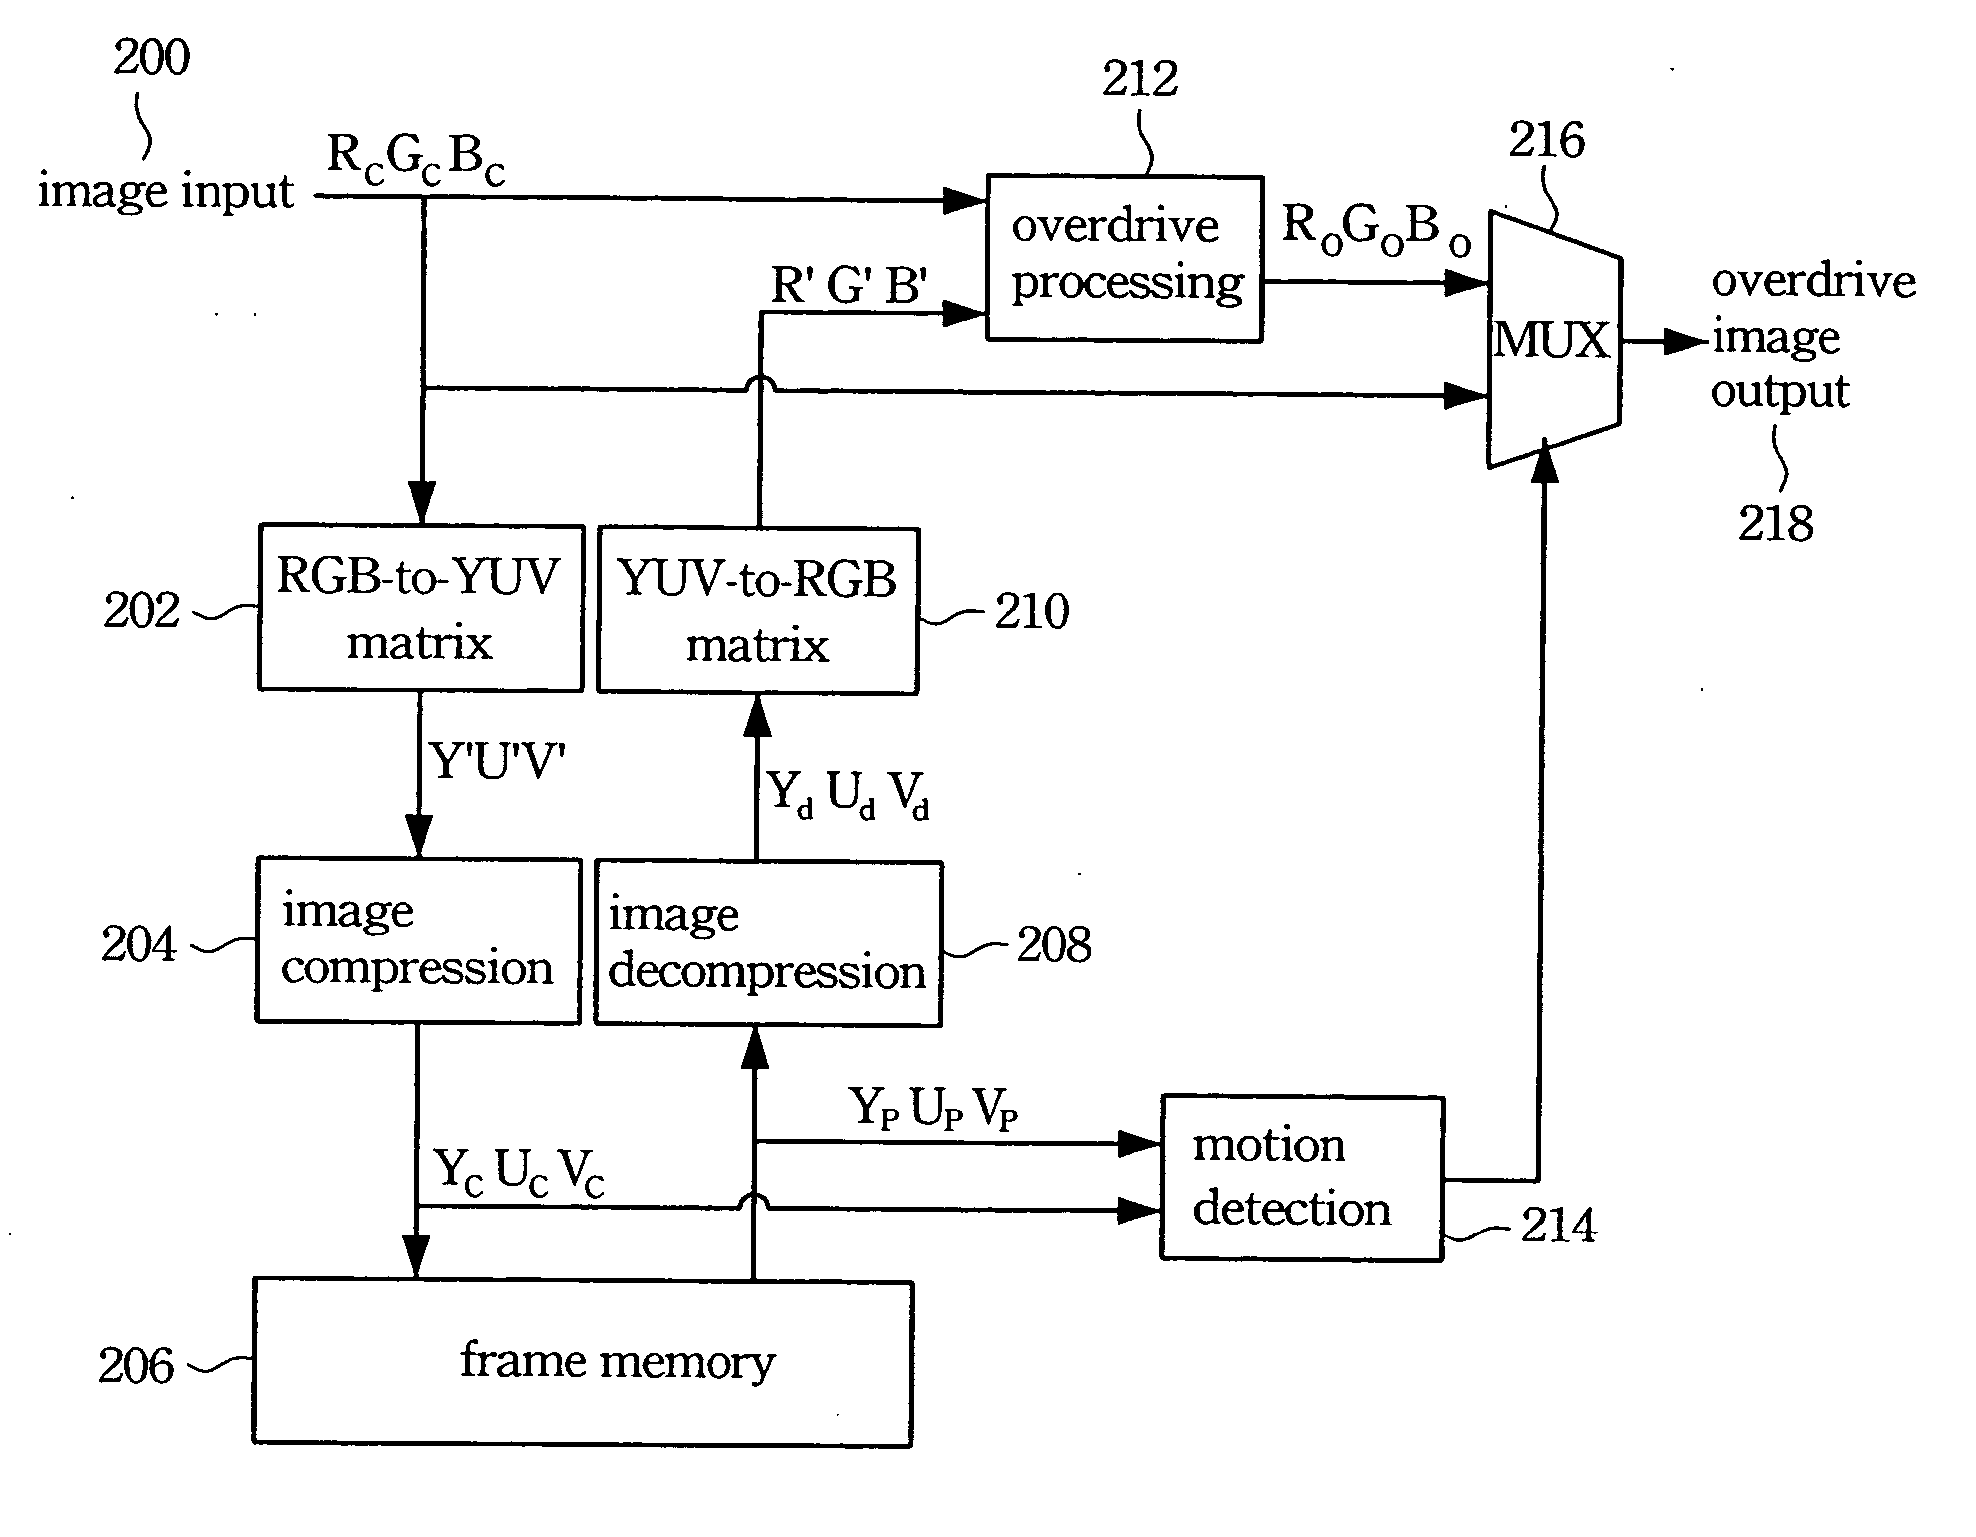 Image processing method for a TFT LCD